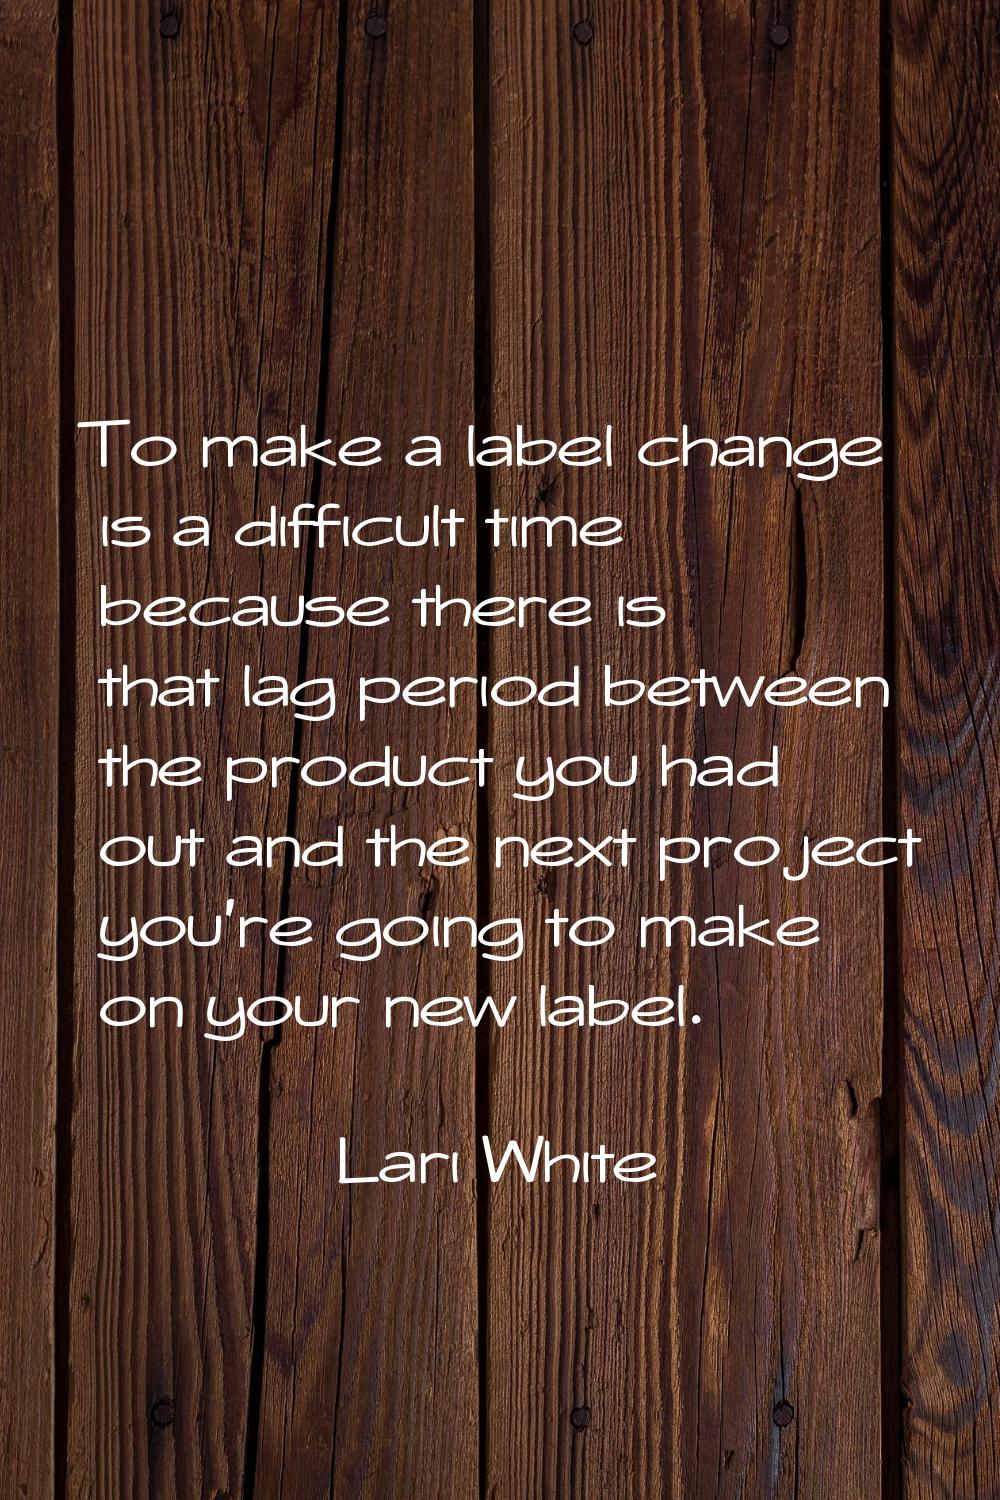 To make a label change is a difficult time because there is that lag period between the product you